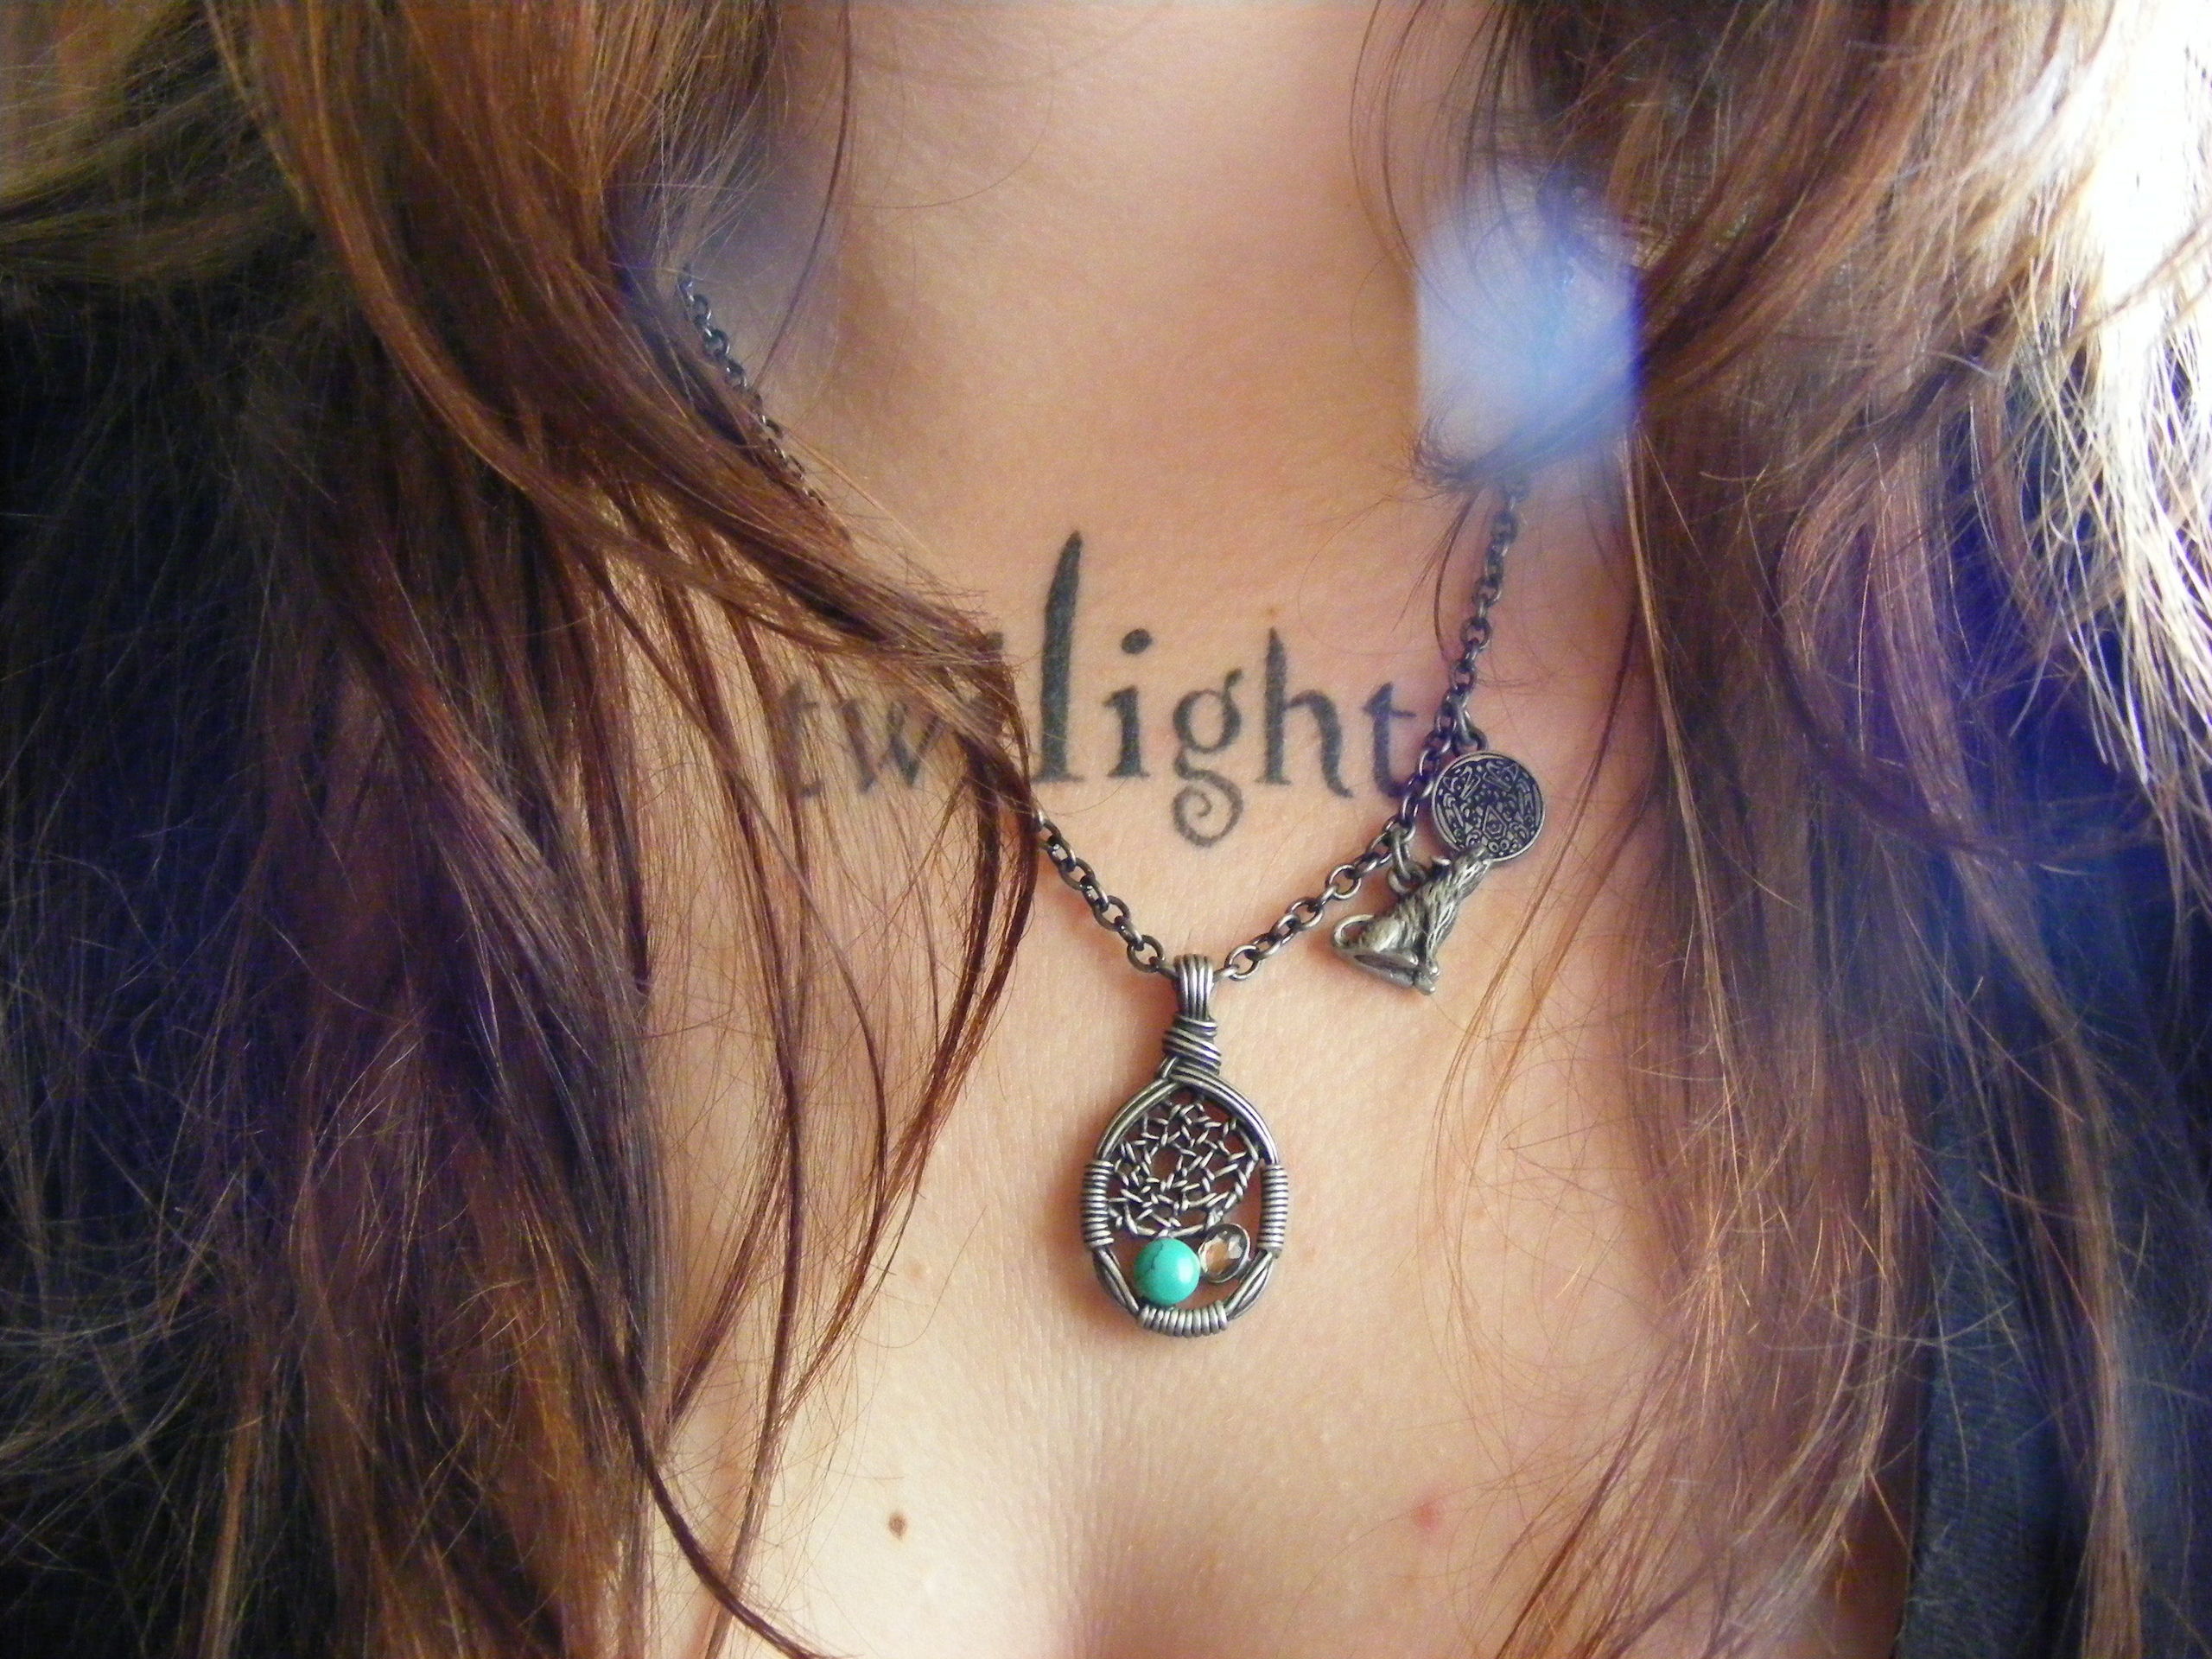 My-Twilight-tattoo-and-my-Jacob-necklace-333-maria-and-j-D1-94nn-E2-99-A5-11998042-2560-1920.jpg